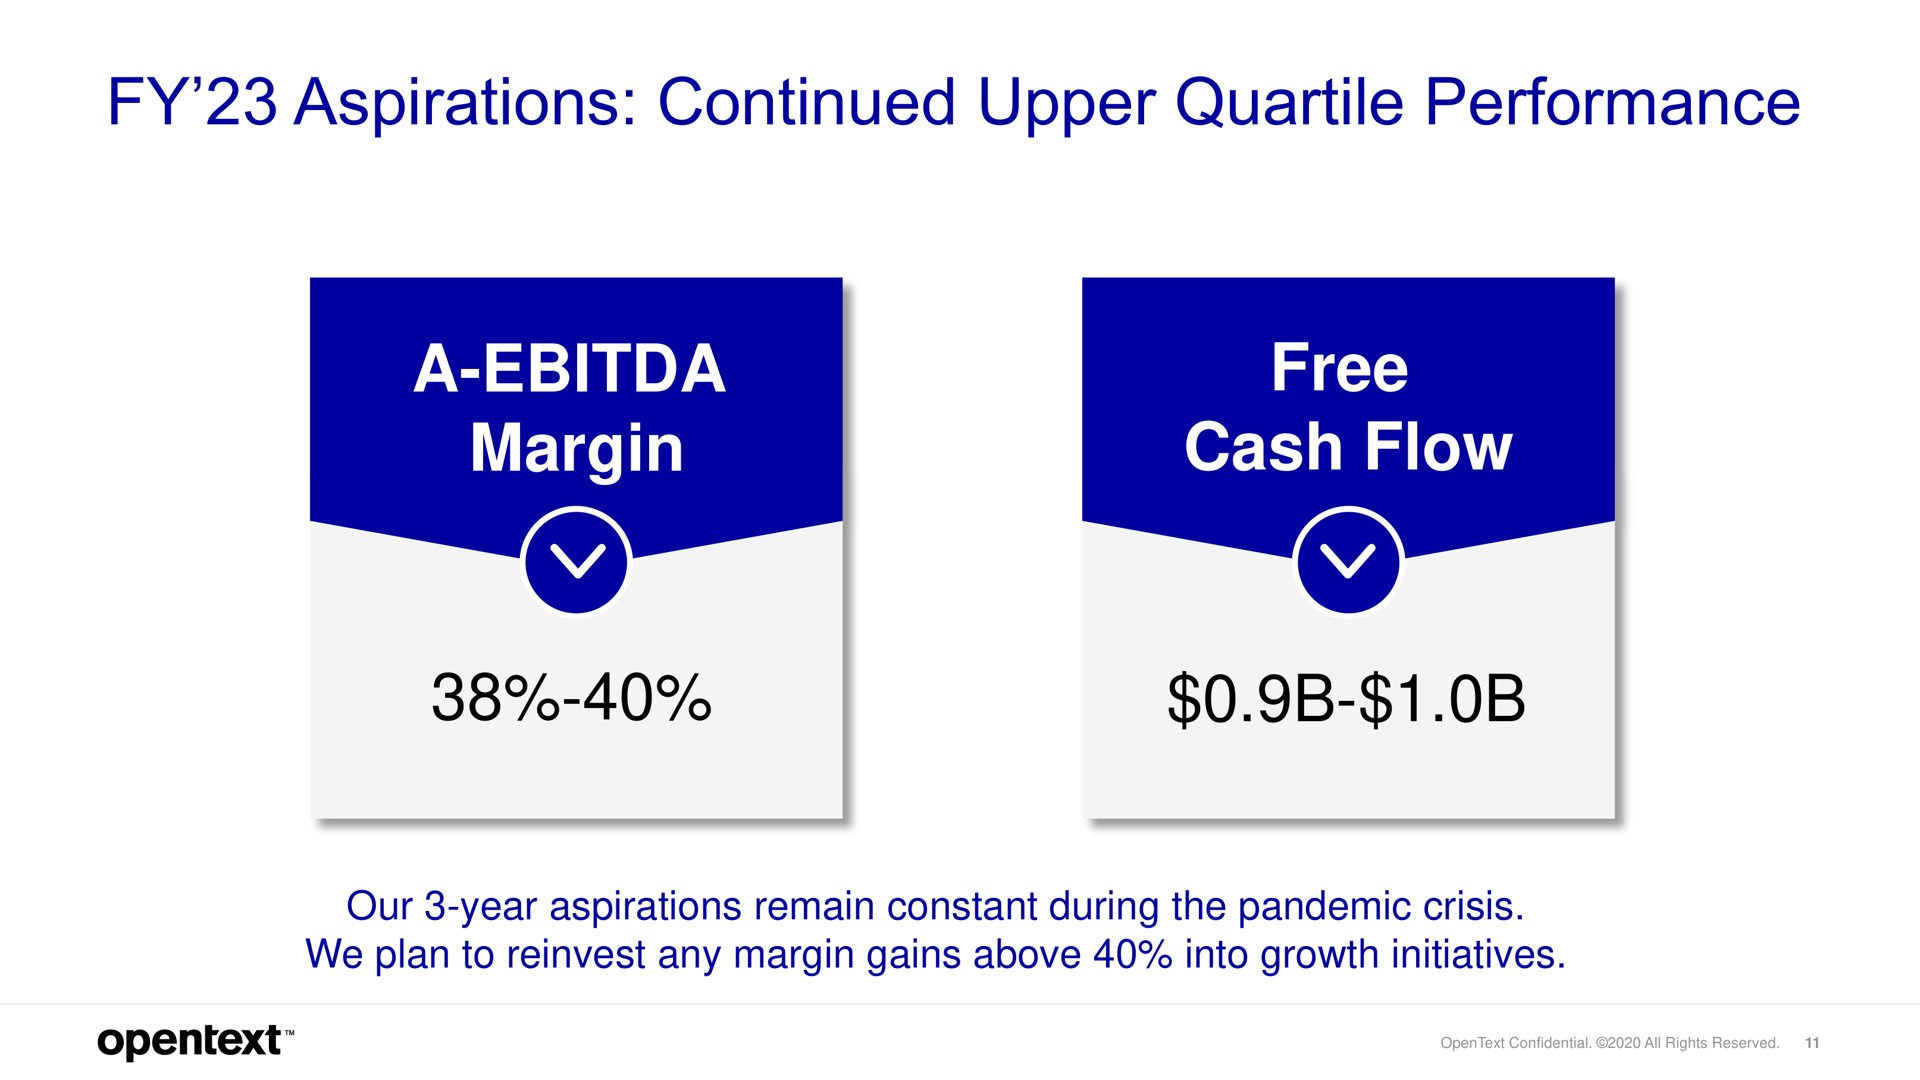 aspirations continued upper quartile performance a margin free cash flow our year aspirations remain constant during the pandemic crisis we plan to reinvest any margin gains above into growth initiatives a | OpenText